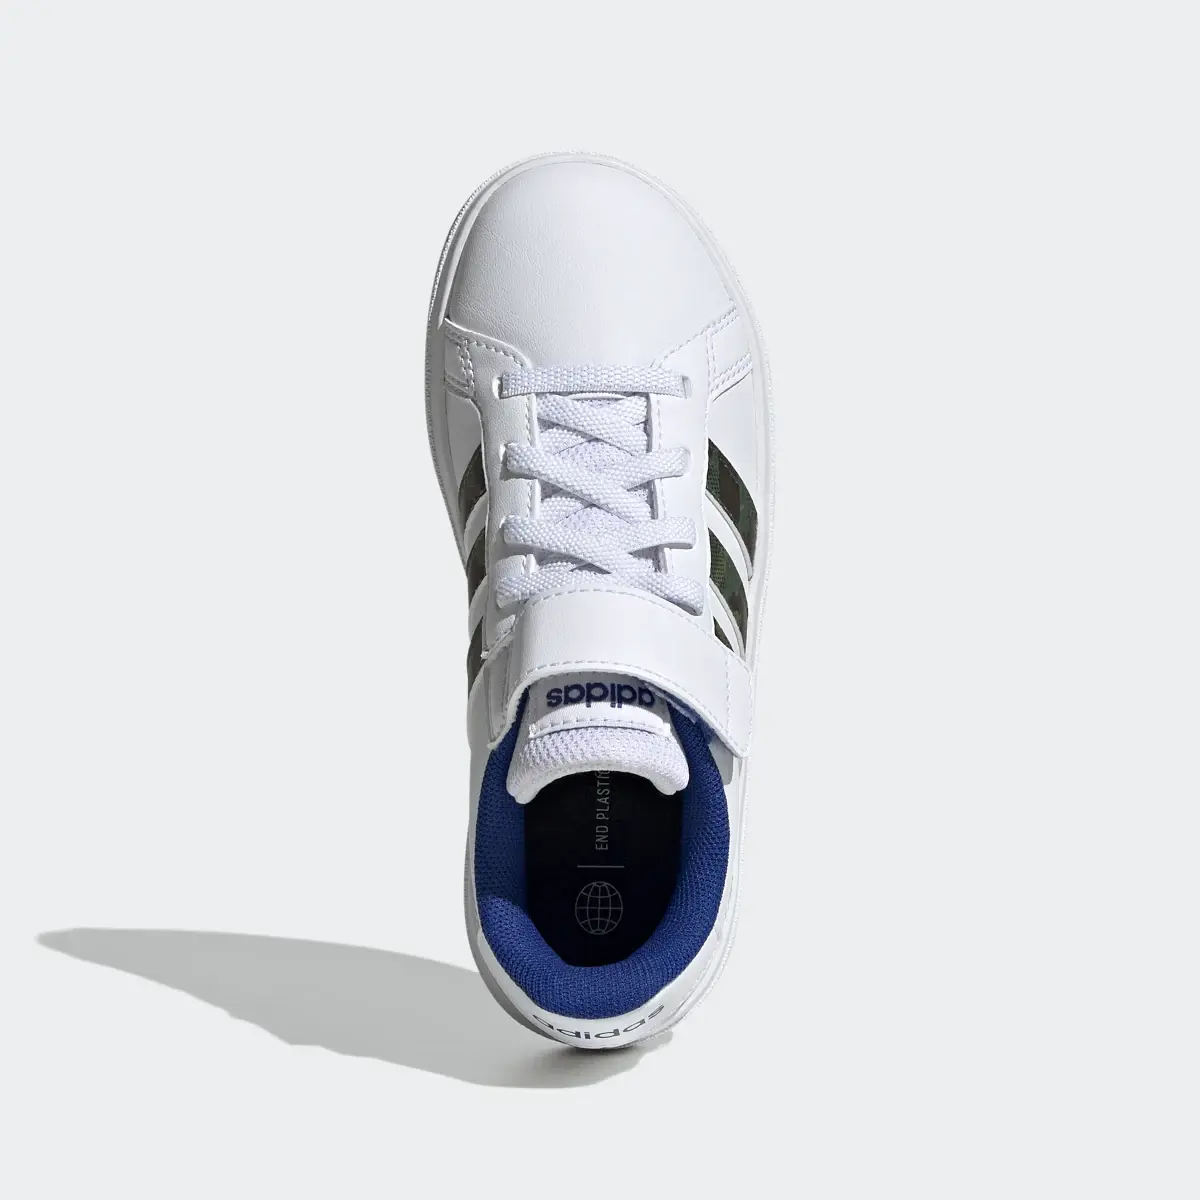 Adidas Grand Court Lifestyle Court Elastic Lace and Top Strap Shoes. 3